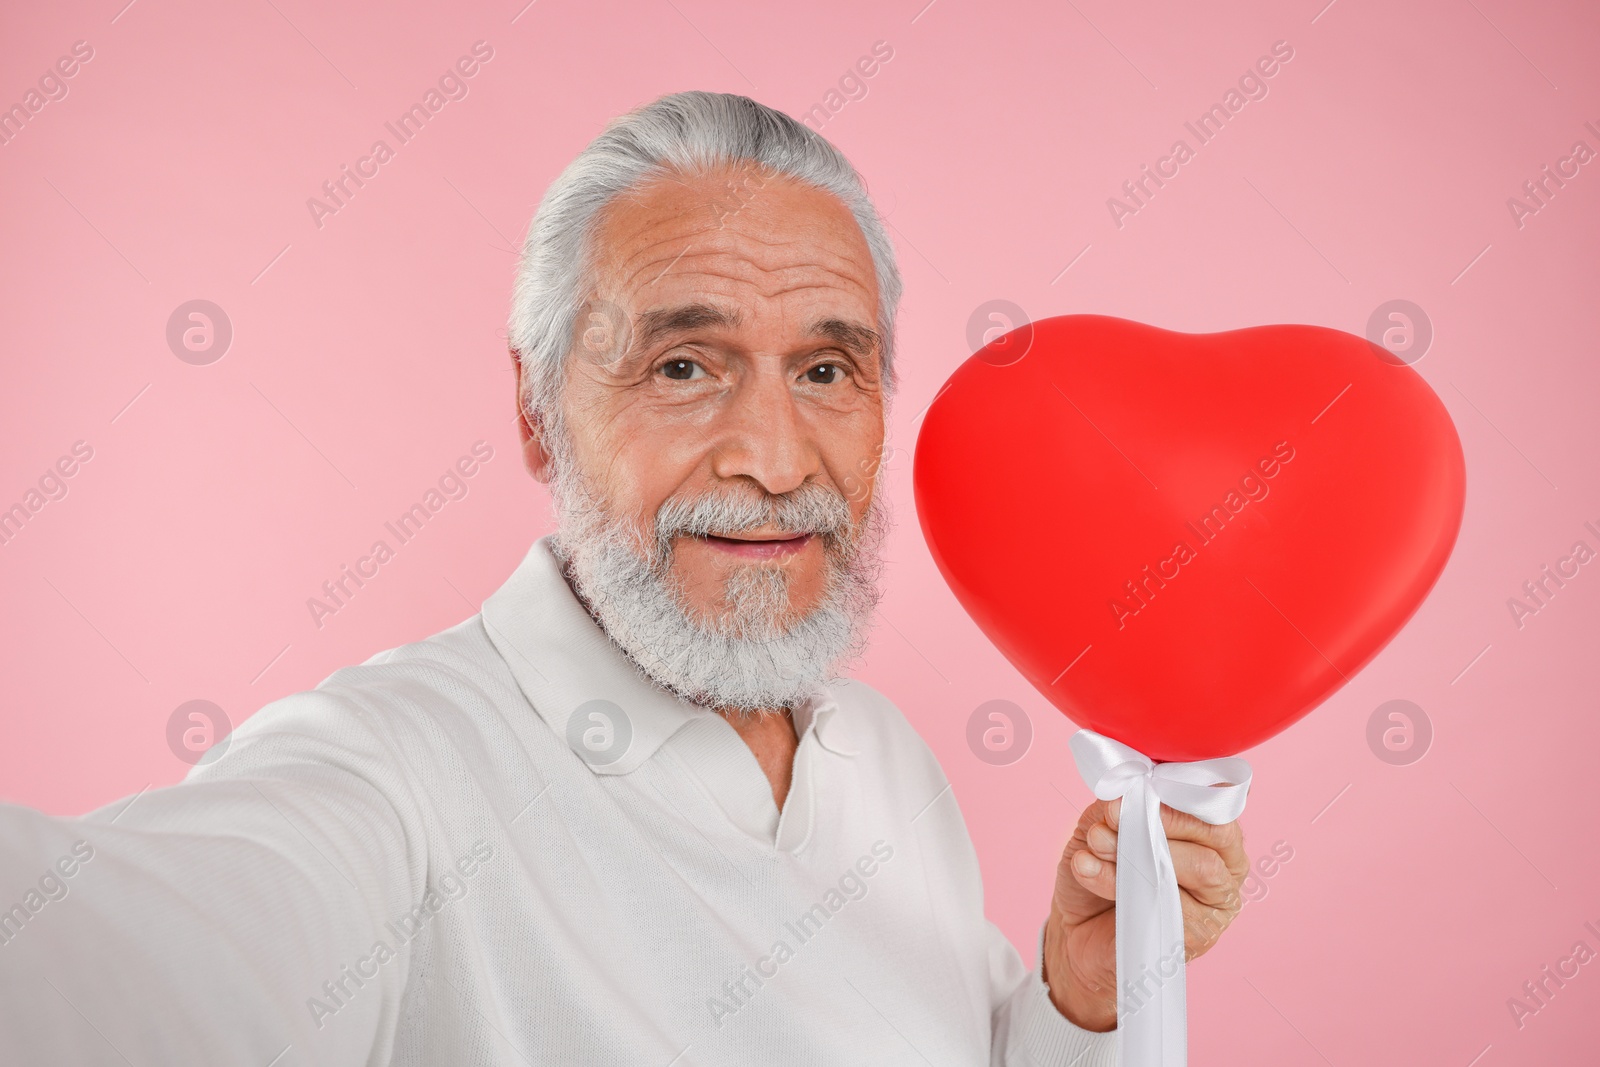 Photo of Senior man with red heart shaped balloon taking selfie on pink background